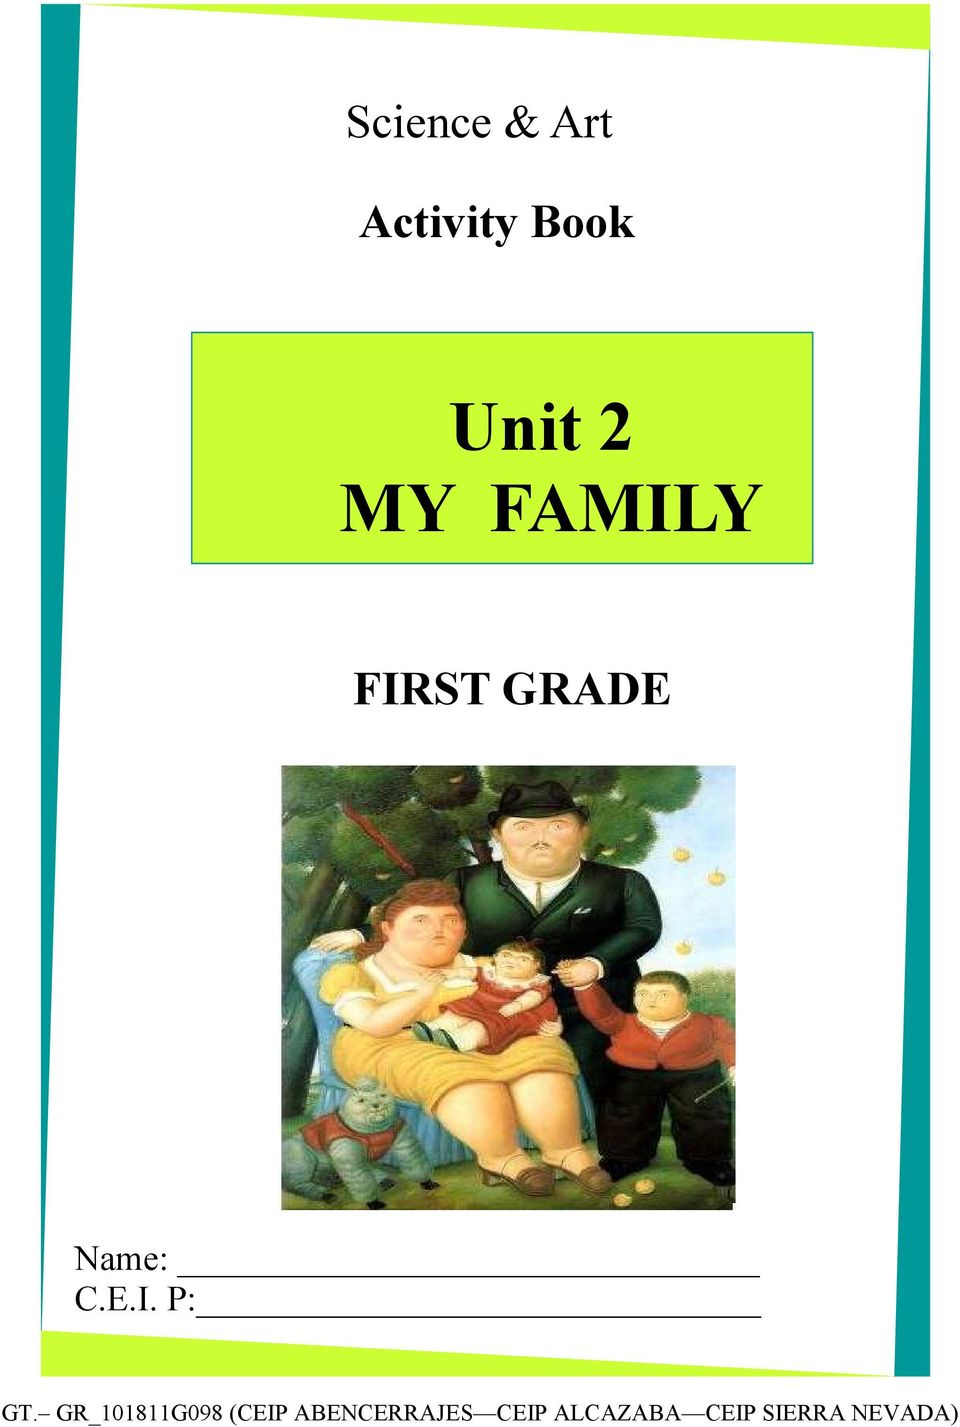 Unit 2 FIRST